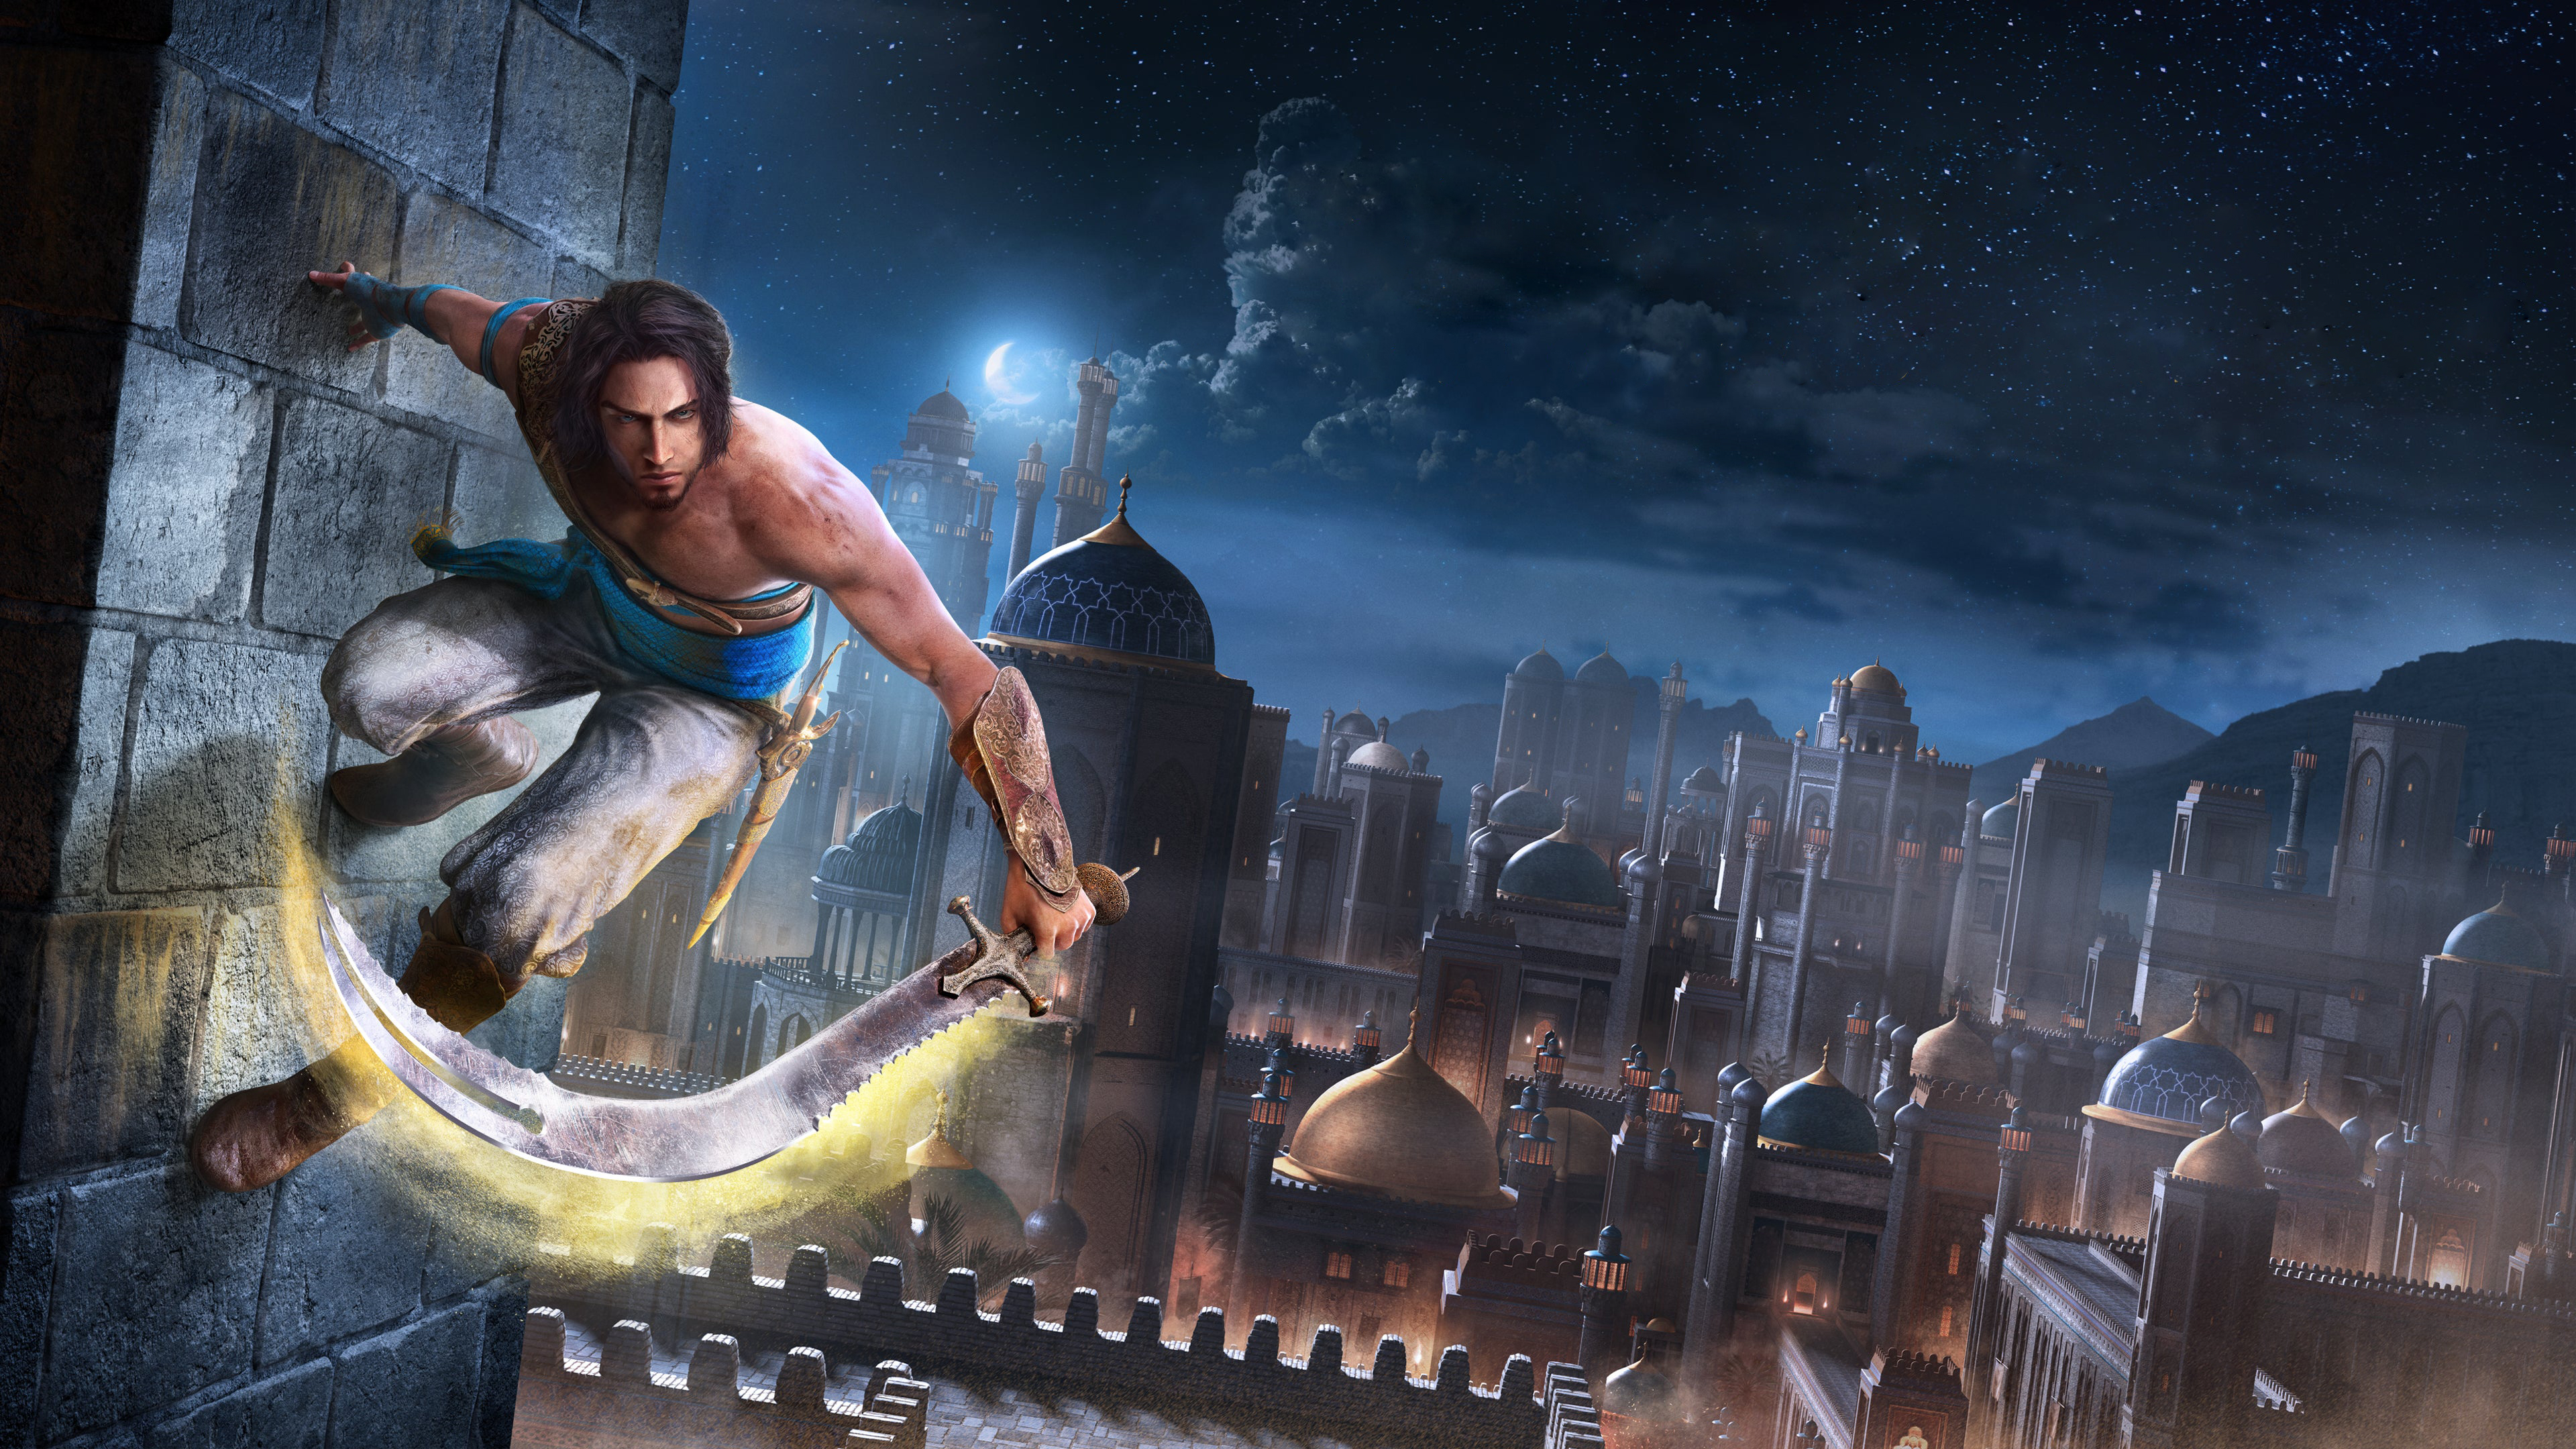 Prince Of Persia: The Sands Of Time Remake Lock Screen Wallpaper